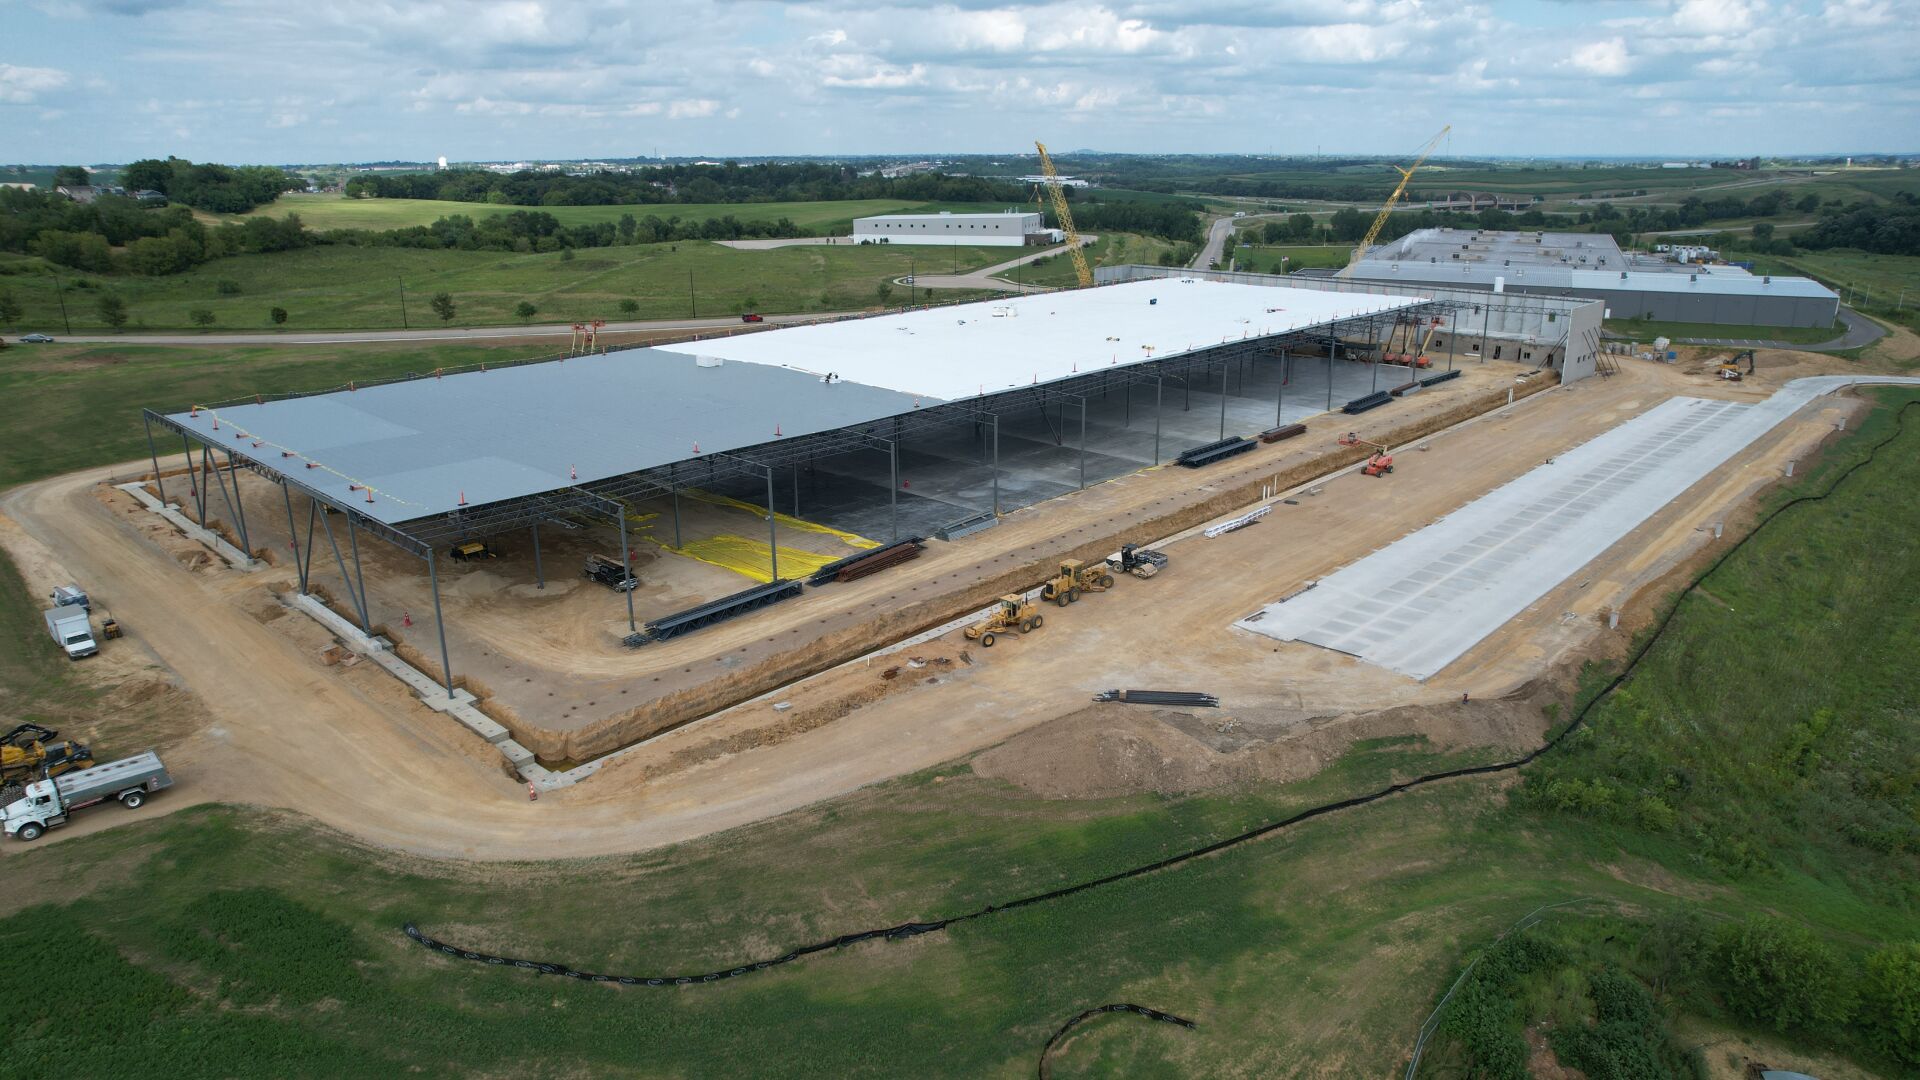 Work continues on a new warehouse along Seippel Road in Dubuque on Thursday, July 20, 2023. Seippel Warehouse LLC is constructing the 250,000-square-foot warehouse, which it will lease to Simmons Pet Food once it is completed.    PHOTO CREDIT: Dave Kettering